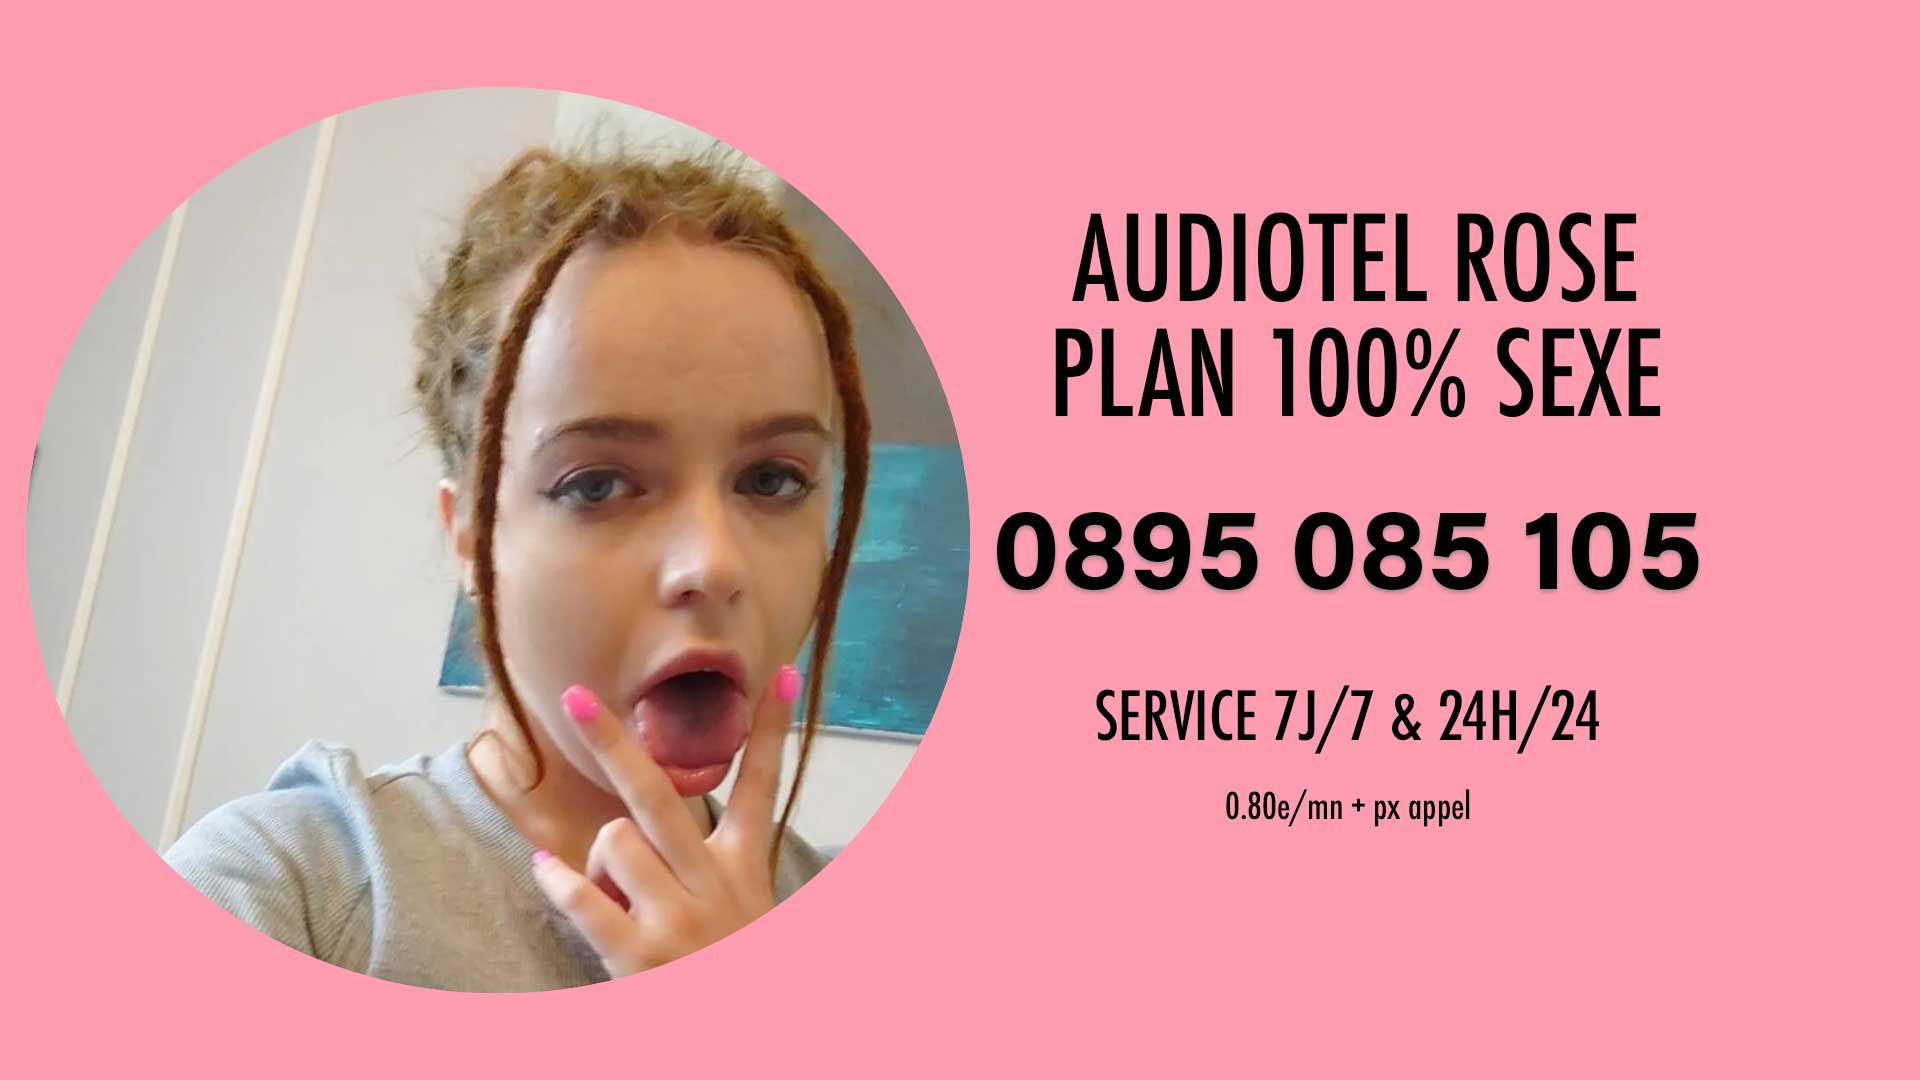 Audiotel Rose : Service audio charme adultes